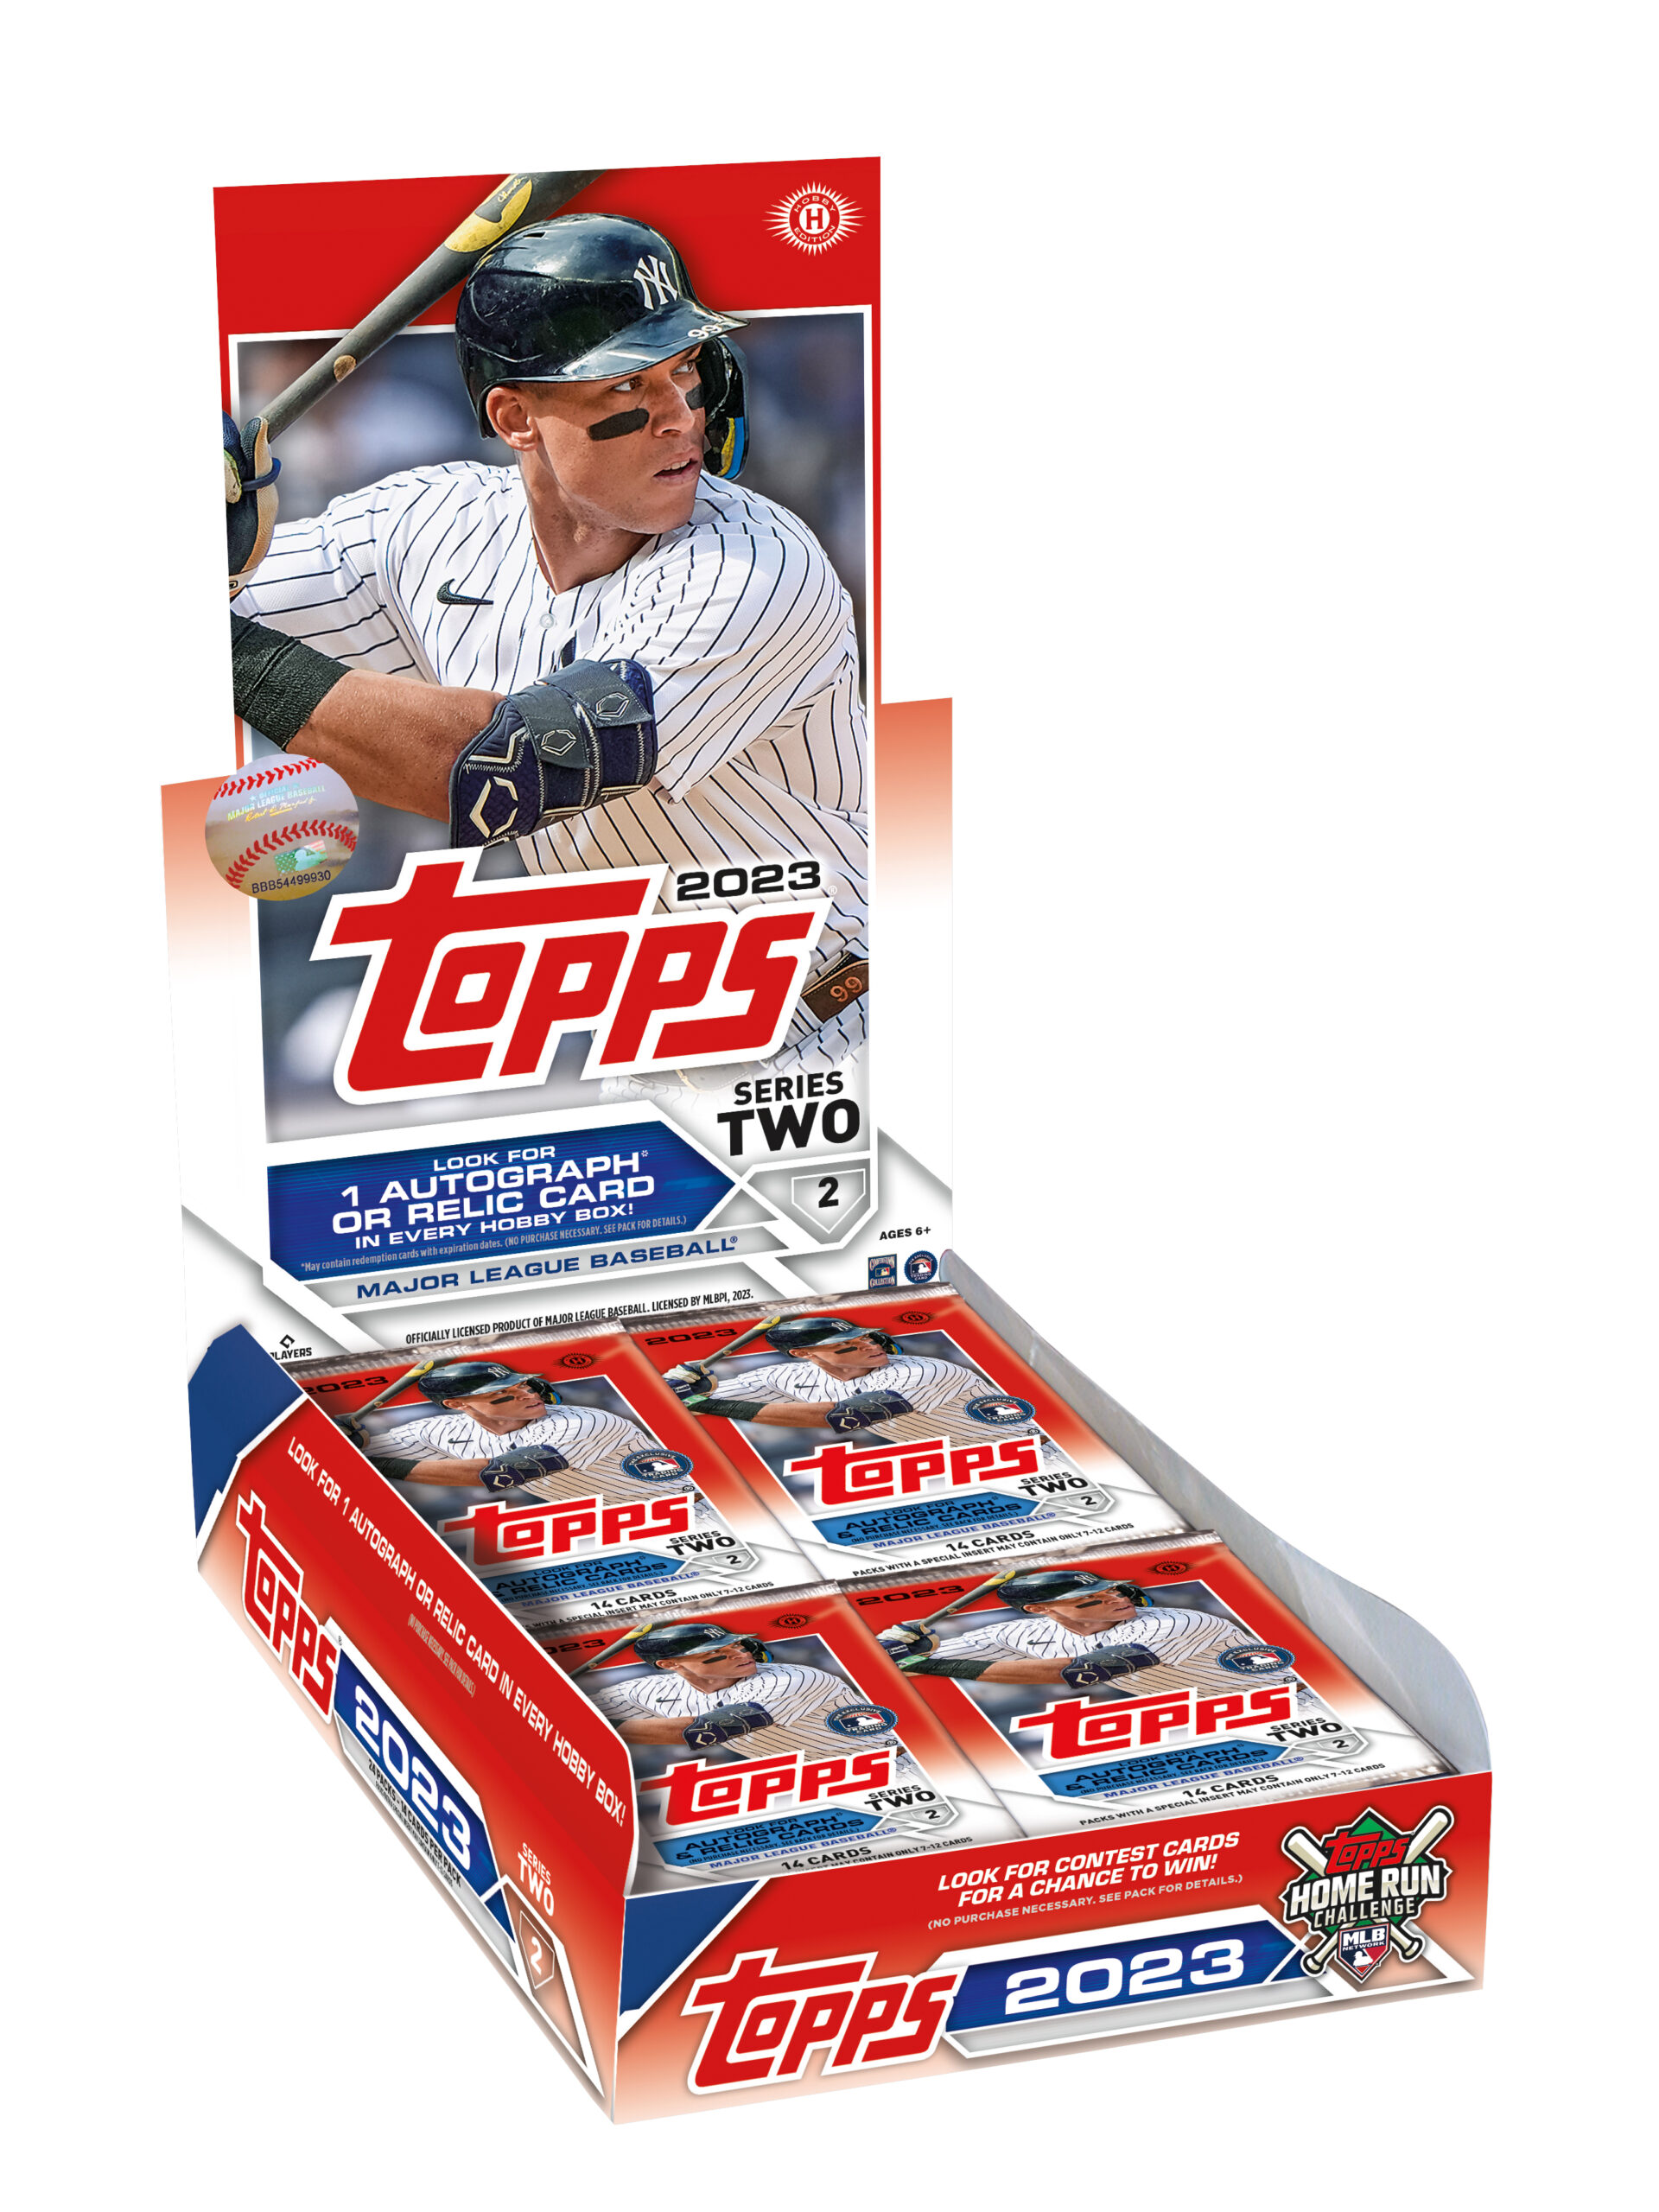 What 2023 Topps Series 2 Box is Right for Me? Topps Ripped